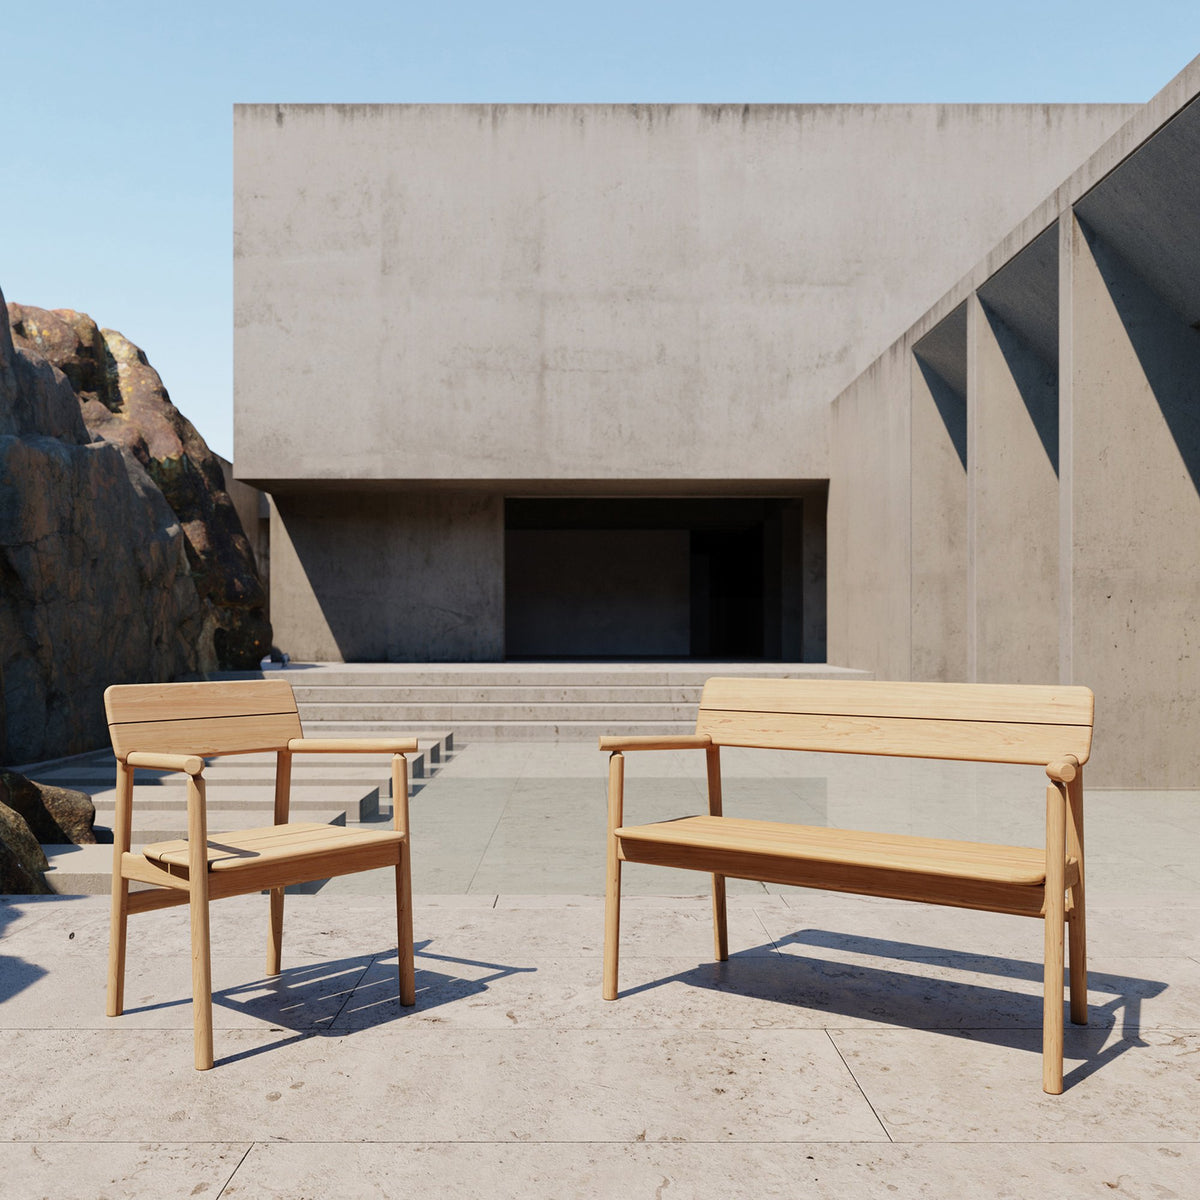 Tanso Bench by Case